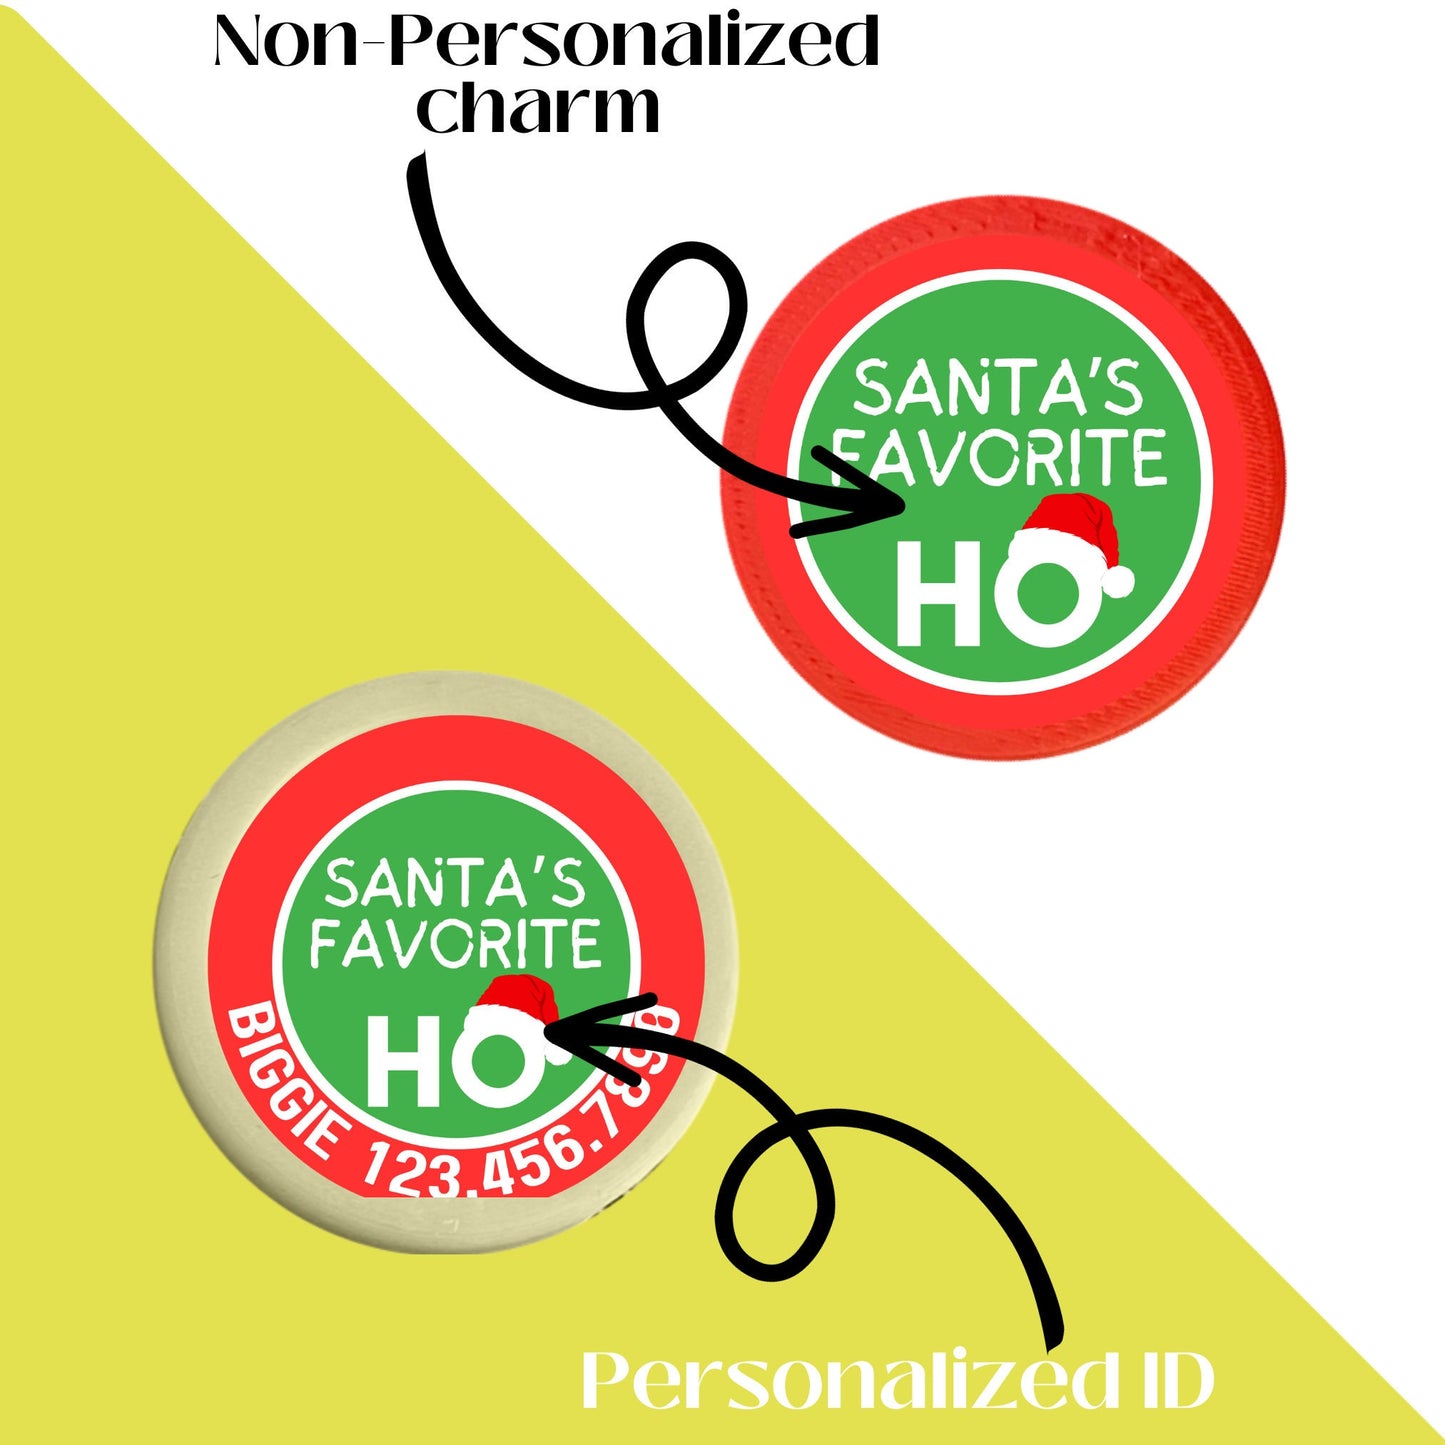 Santa's Favorite Ho Christmas Pet Tag- Silent, Eco-Friendly, Ringless ID Tag for Cats and Dogs